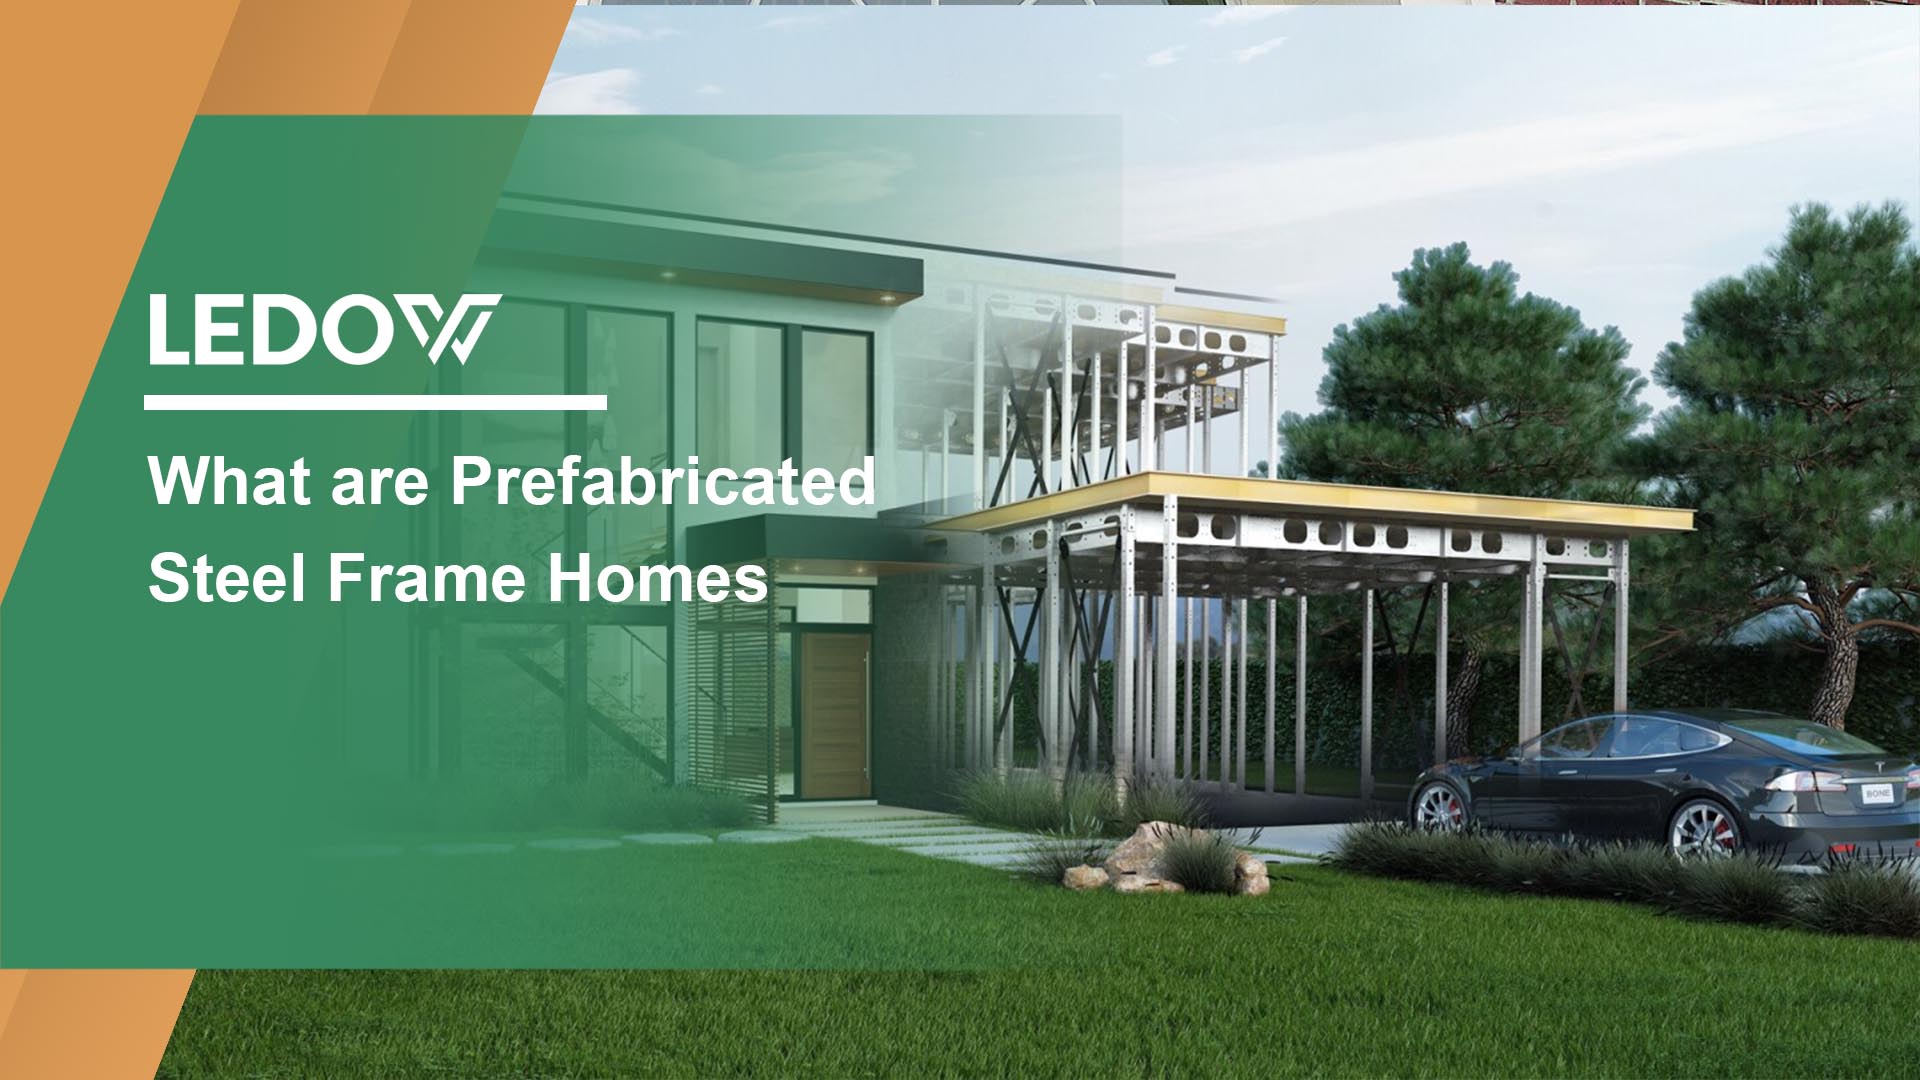 What are Prefabricated Steel Frame Homes?